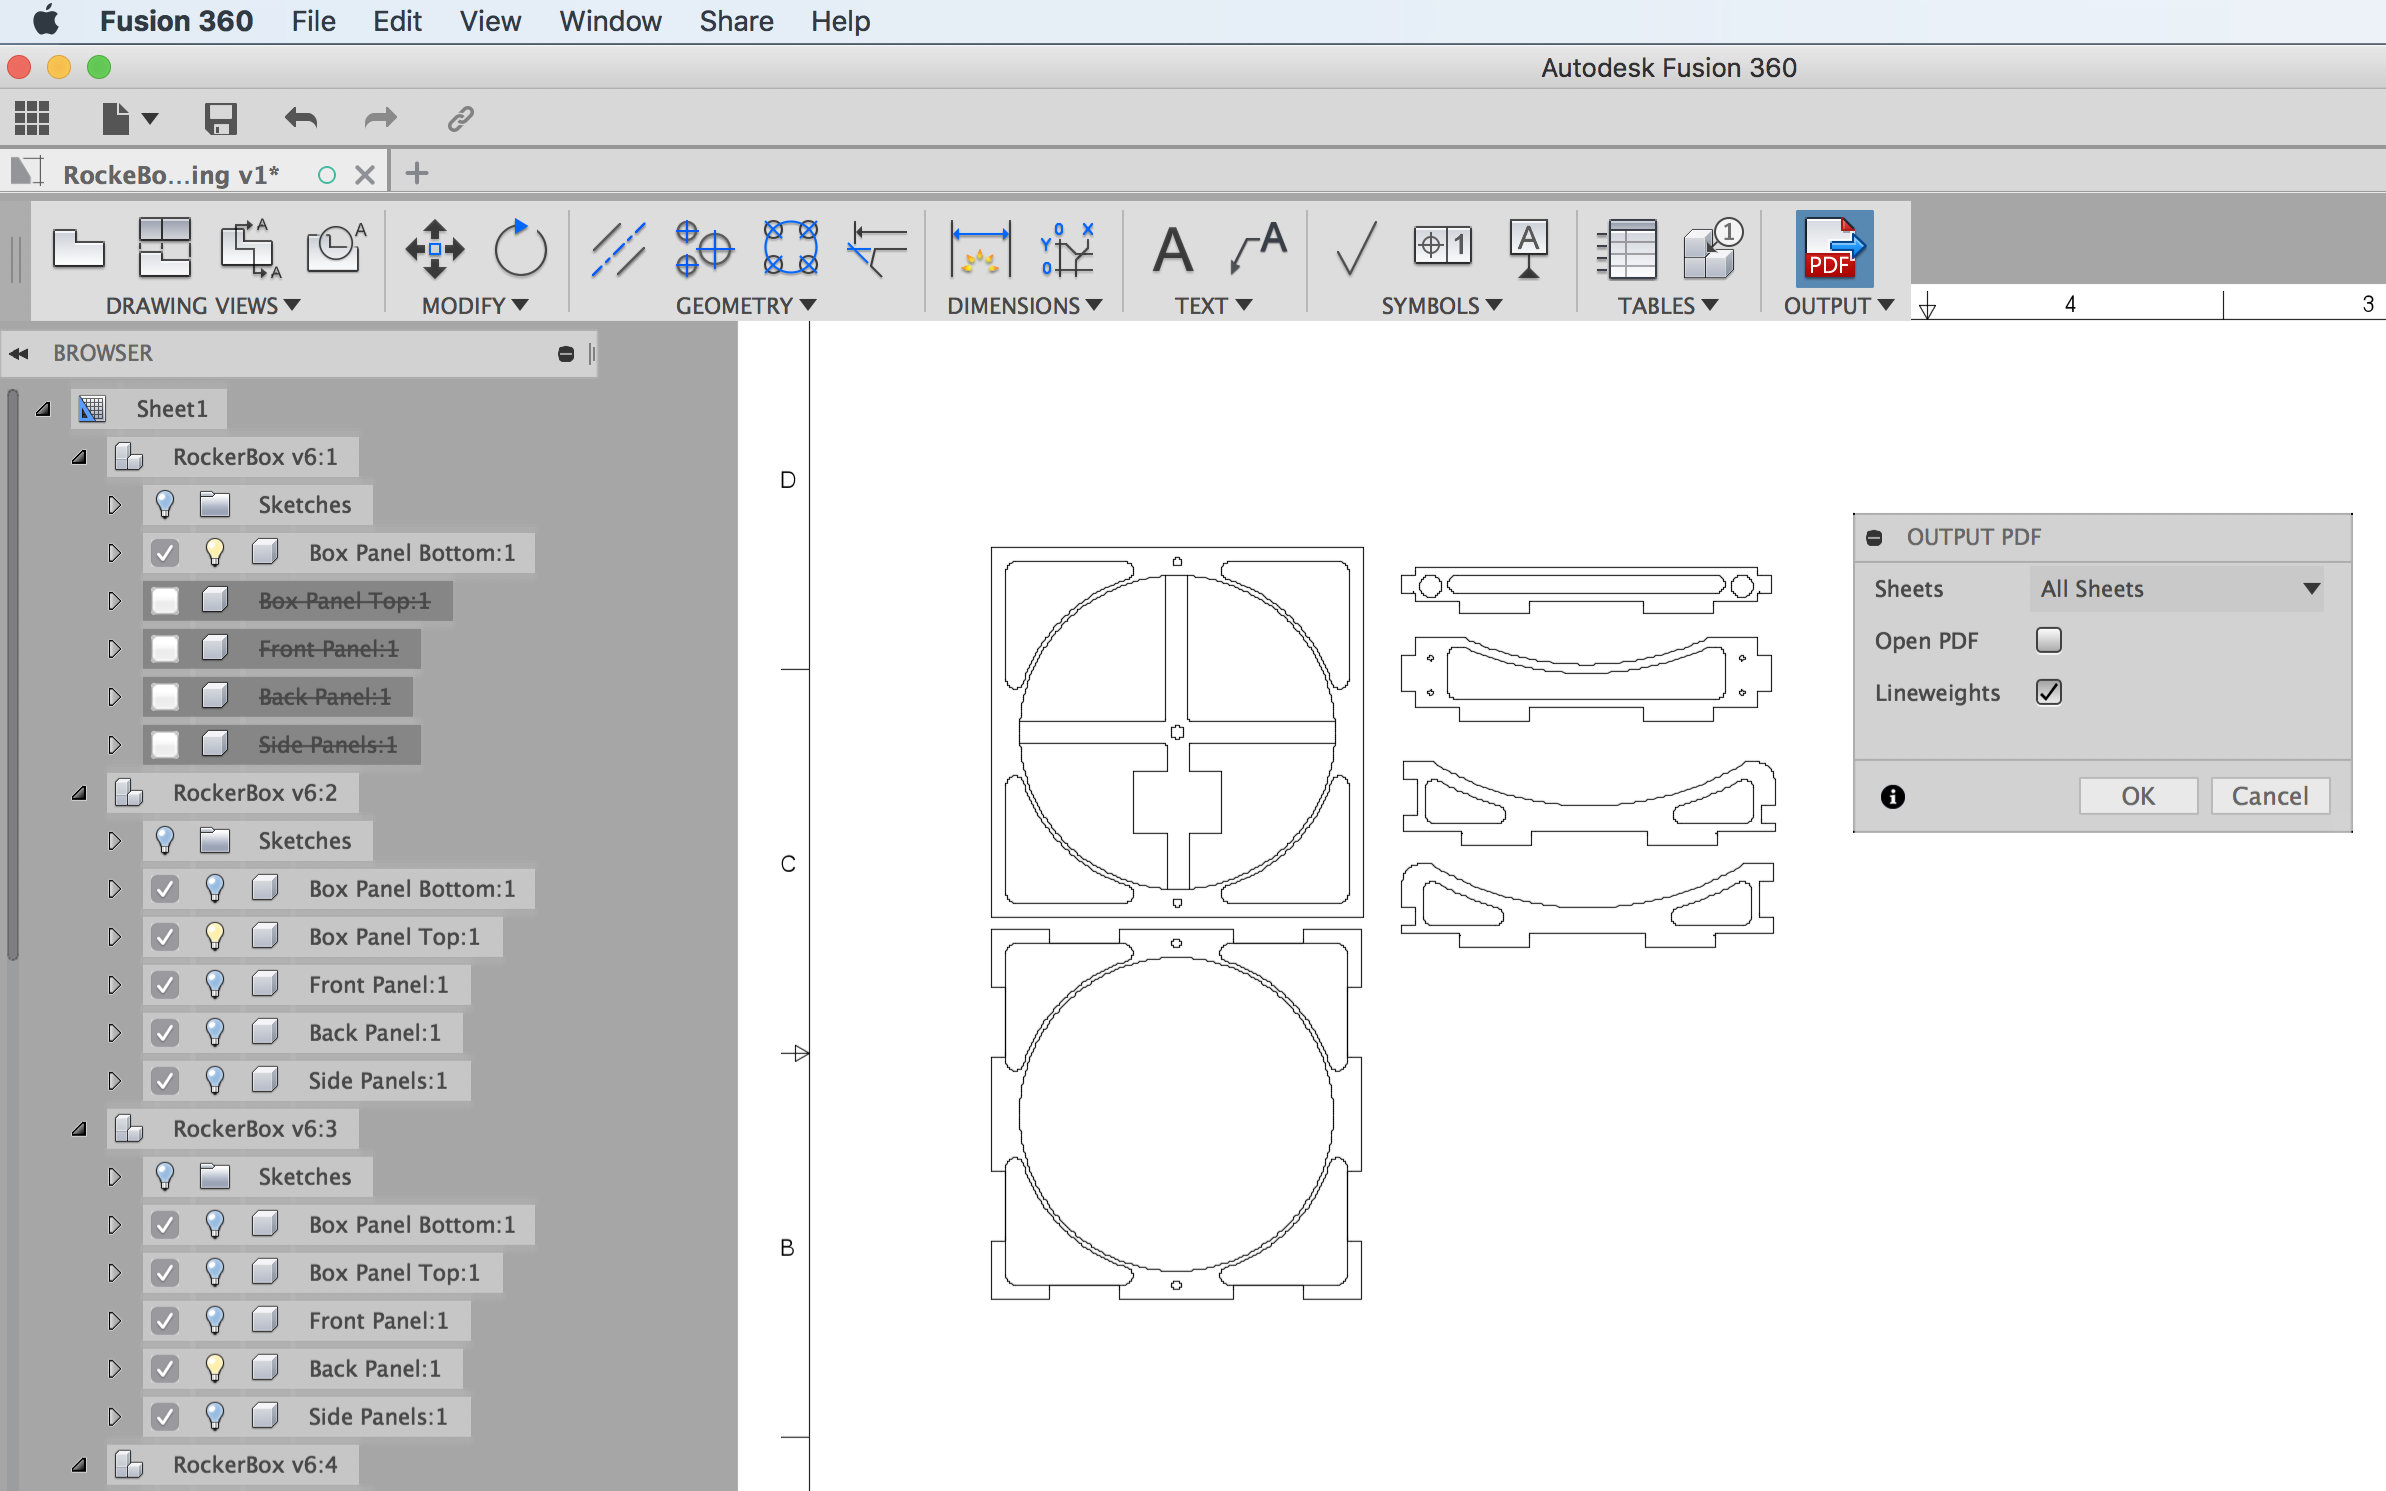 Finally, I exported the pdf of my parts